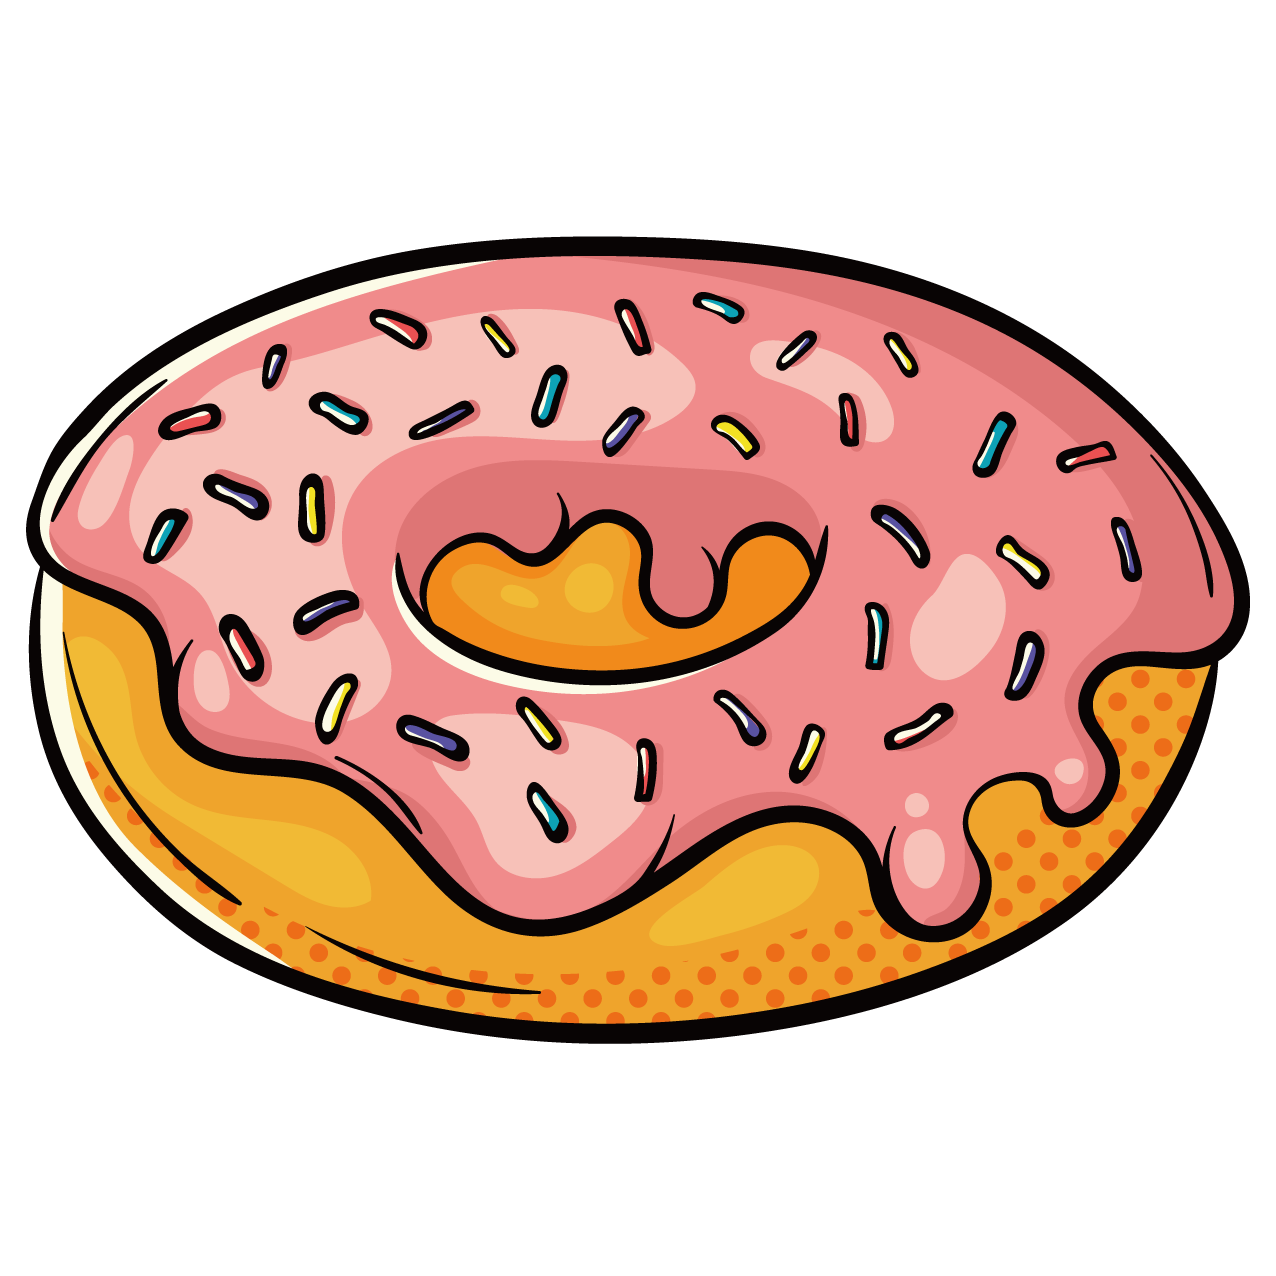 Coffee and doughnuts fast. Donuts clipart strawberry